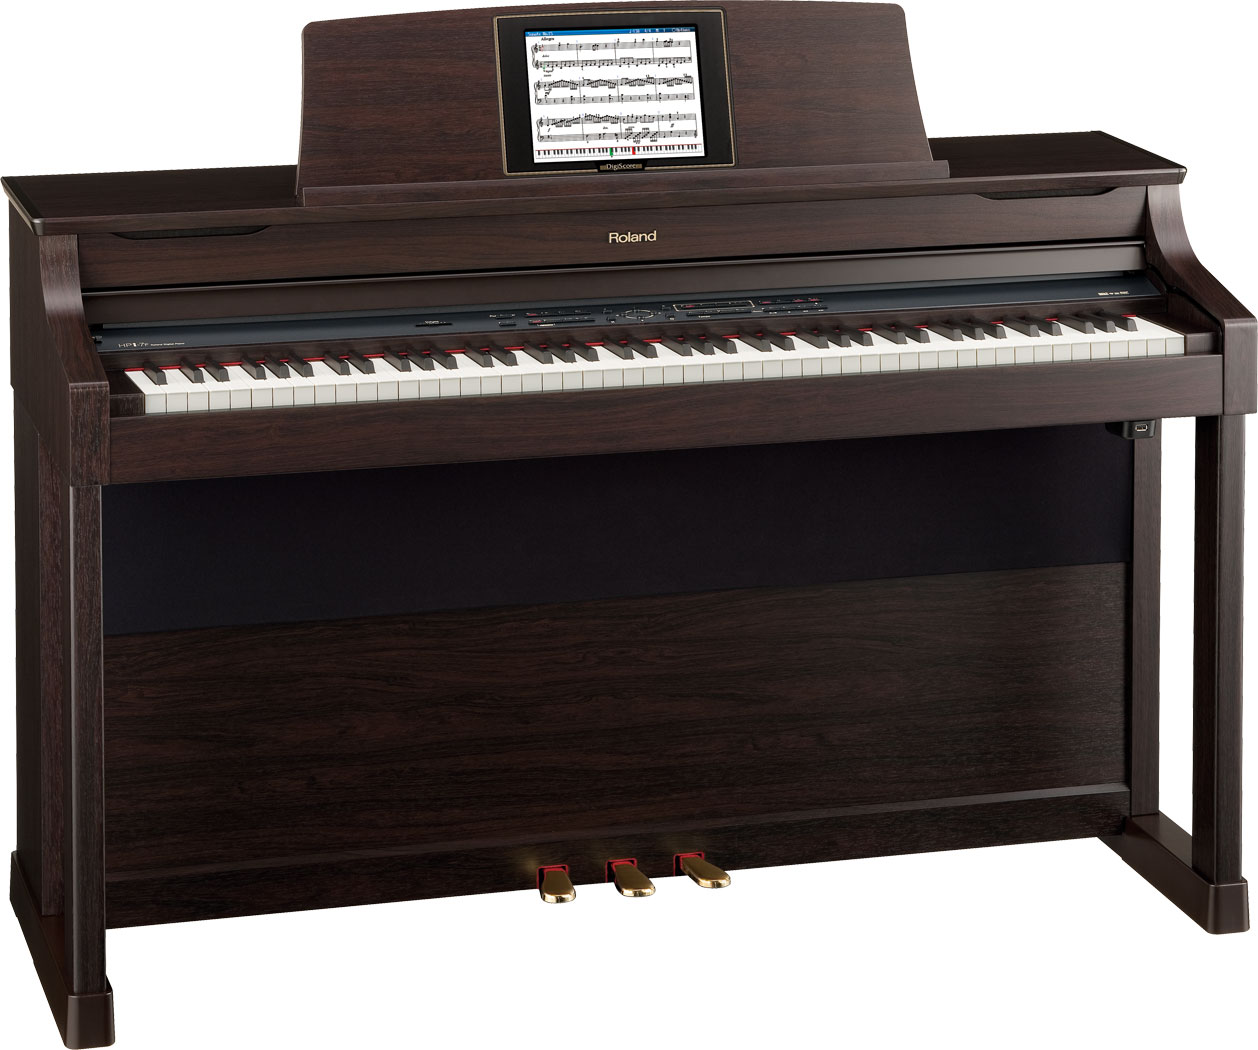 wooden digital piano by roland